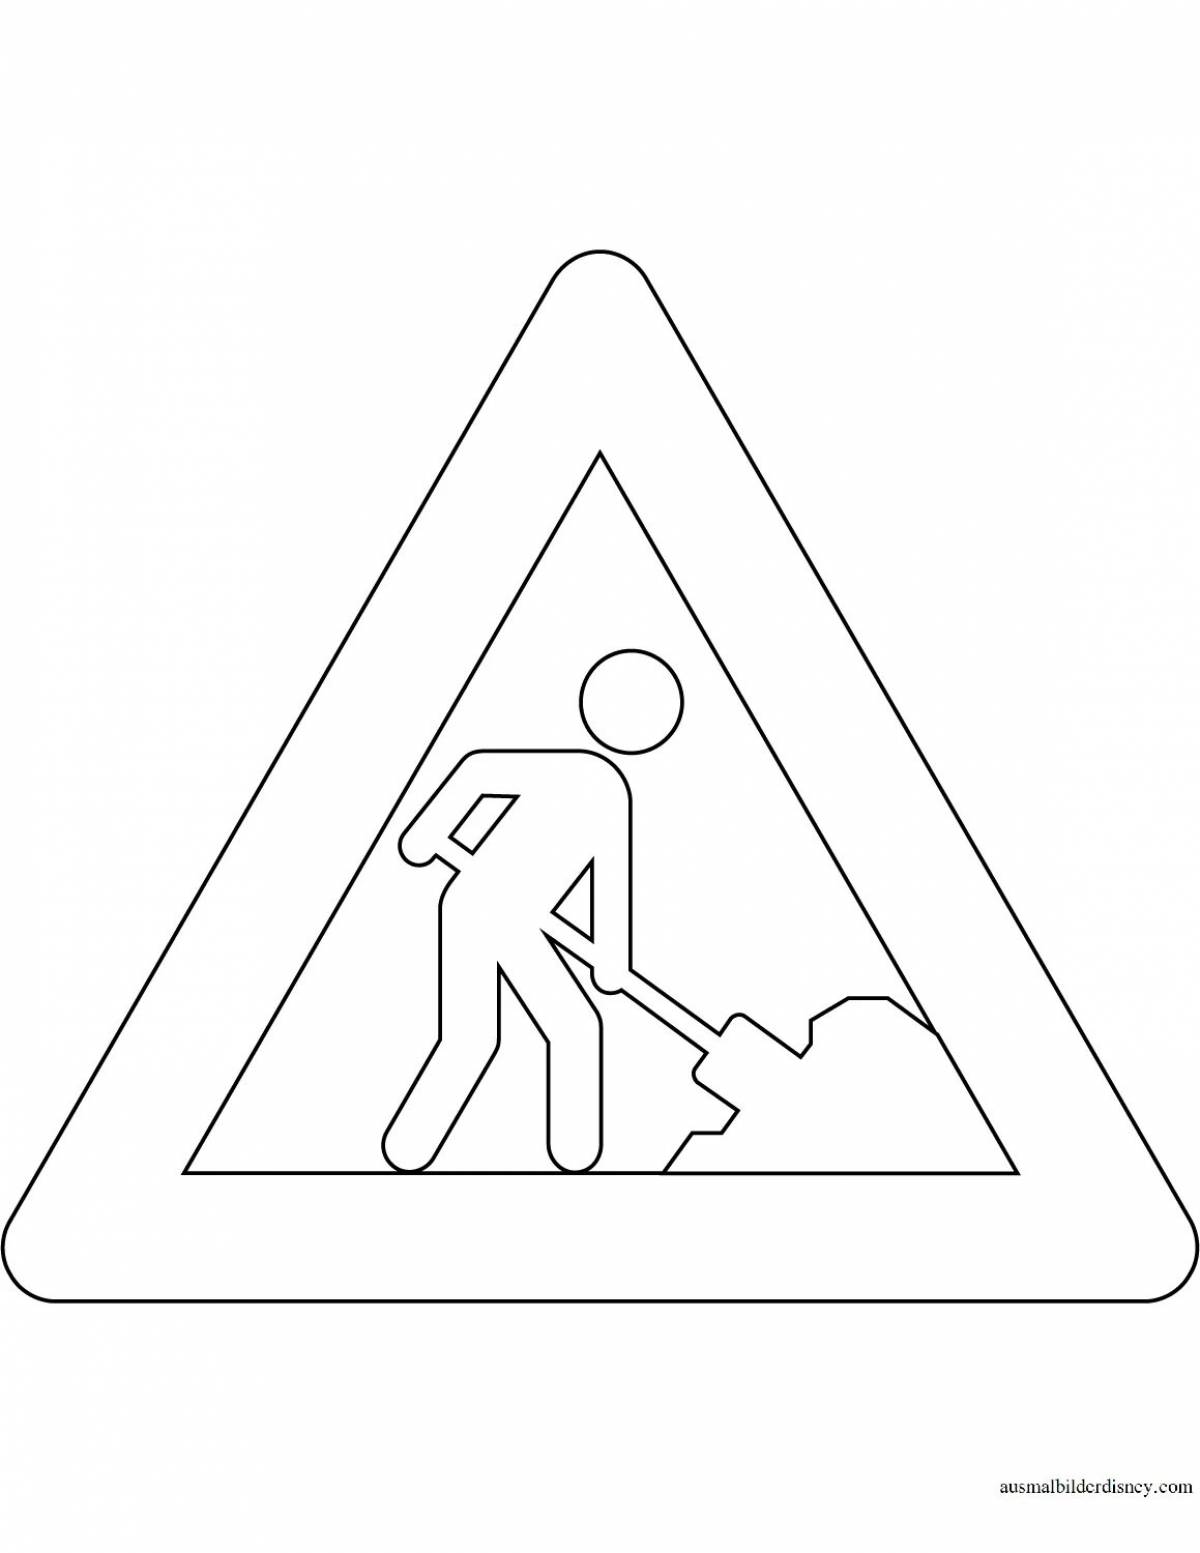 Coloring page traffic sign with color pattern Grade 3